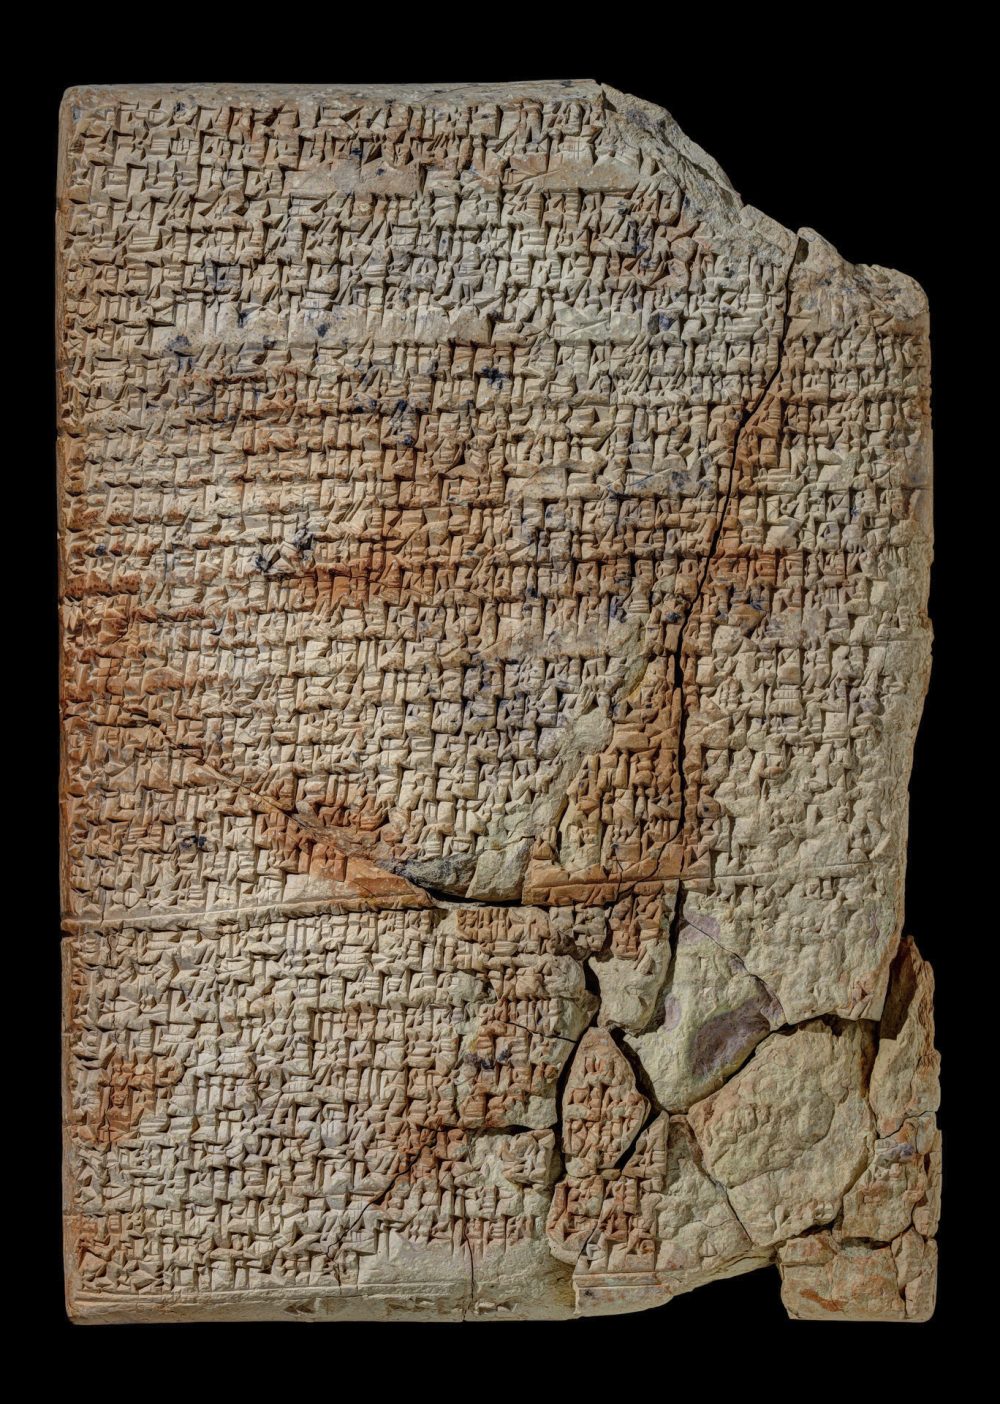 From this ancient tablet, researchers deciphered three recipes: two lamb stews (one made with root vegetables, the other with milk and grain), as well as a vegetarian stew of onions and leeks.